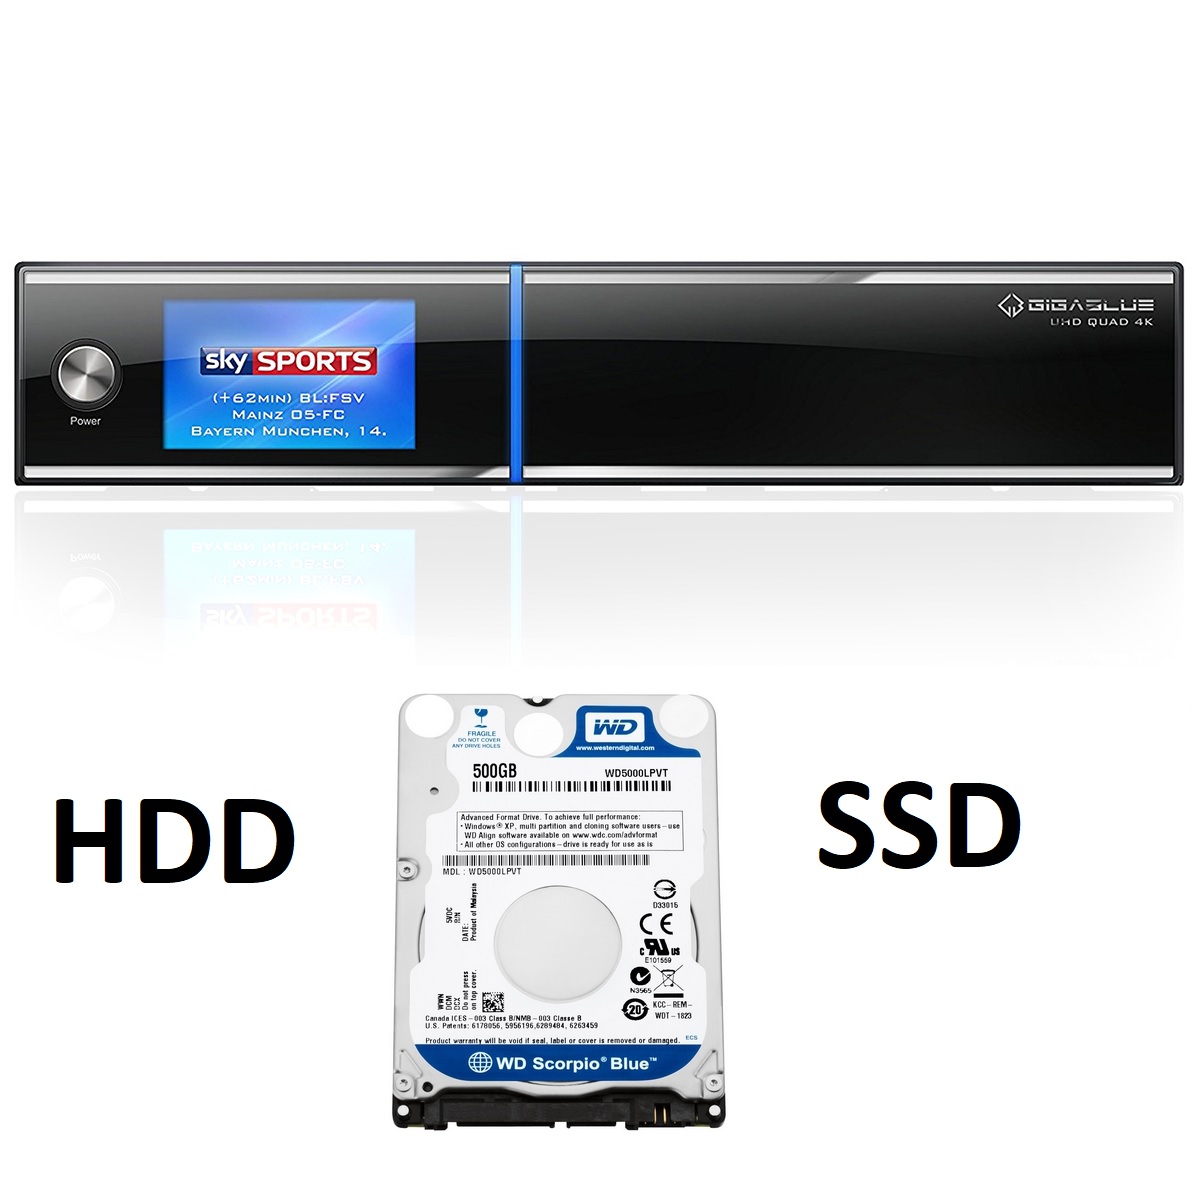 [TUTO] How to install HDD-SSD drive on your GIGABLUE UHD QUAD 4K